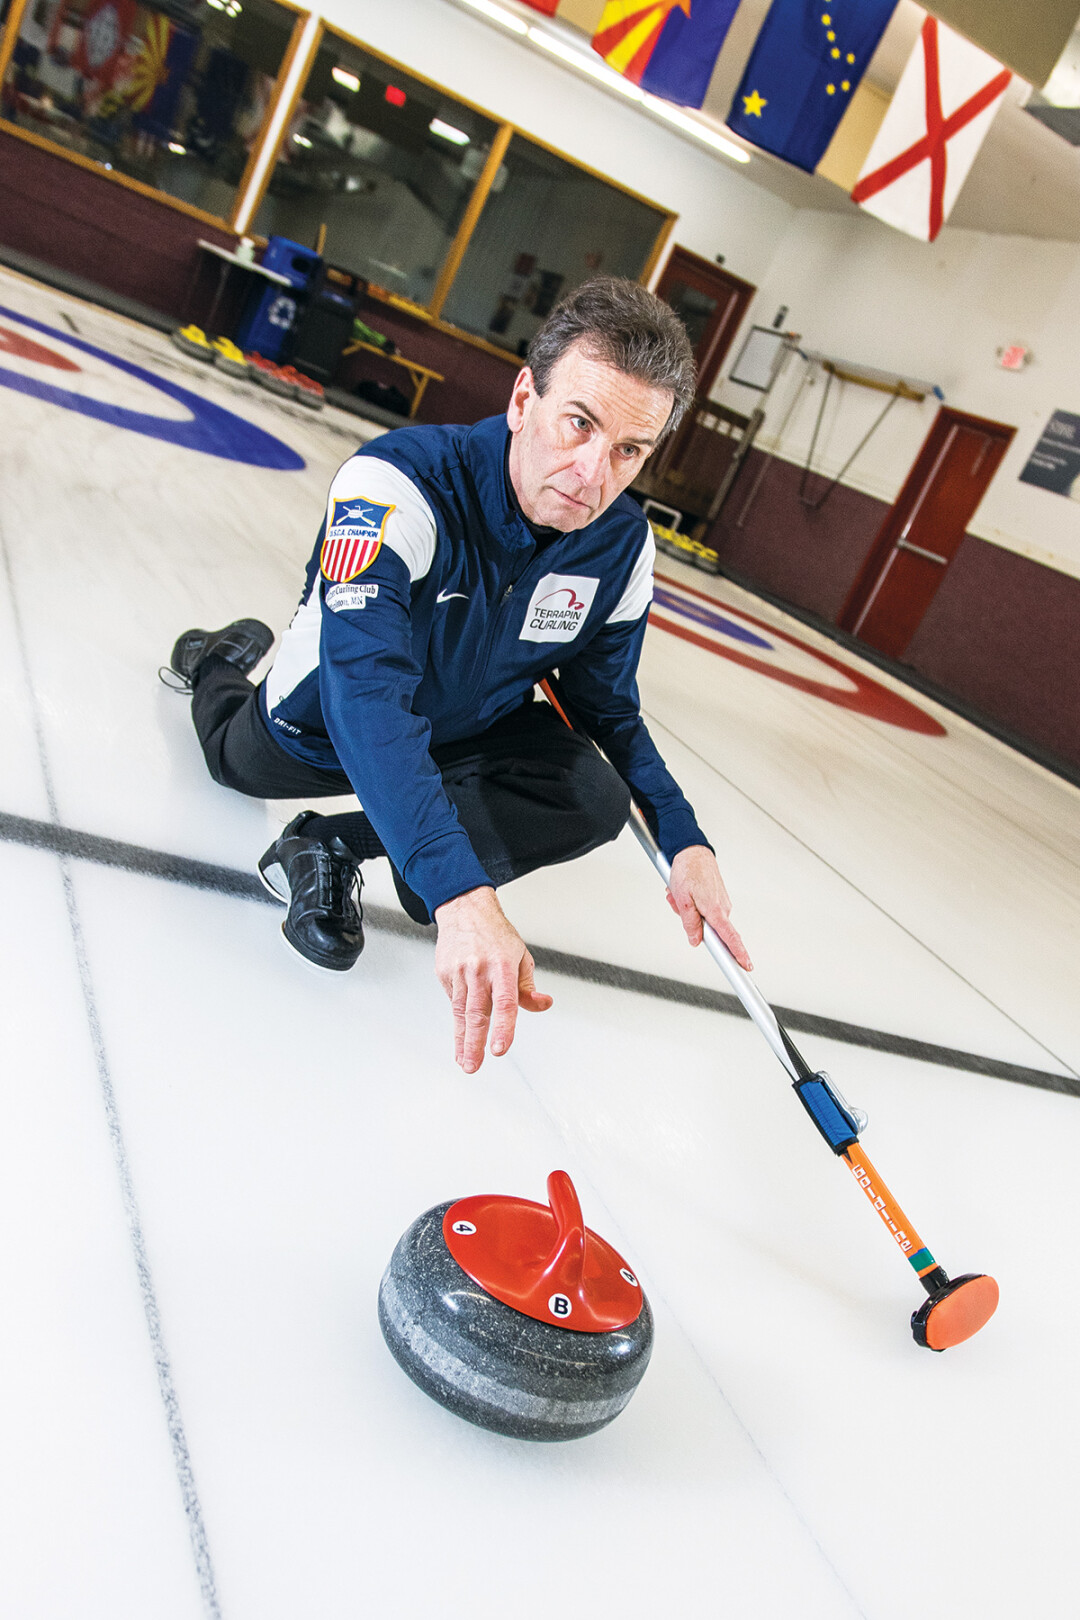 LIKE A ROLLING STONE. Eau Claire curler Geoff Goodland will go to Norway in April to compete in the World Senior Curling Championships in Stavangar, Norway. It will be his fifth trip to the World Senior event.